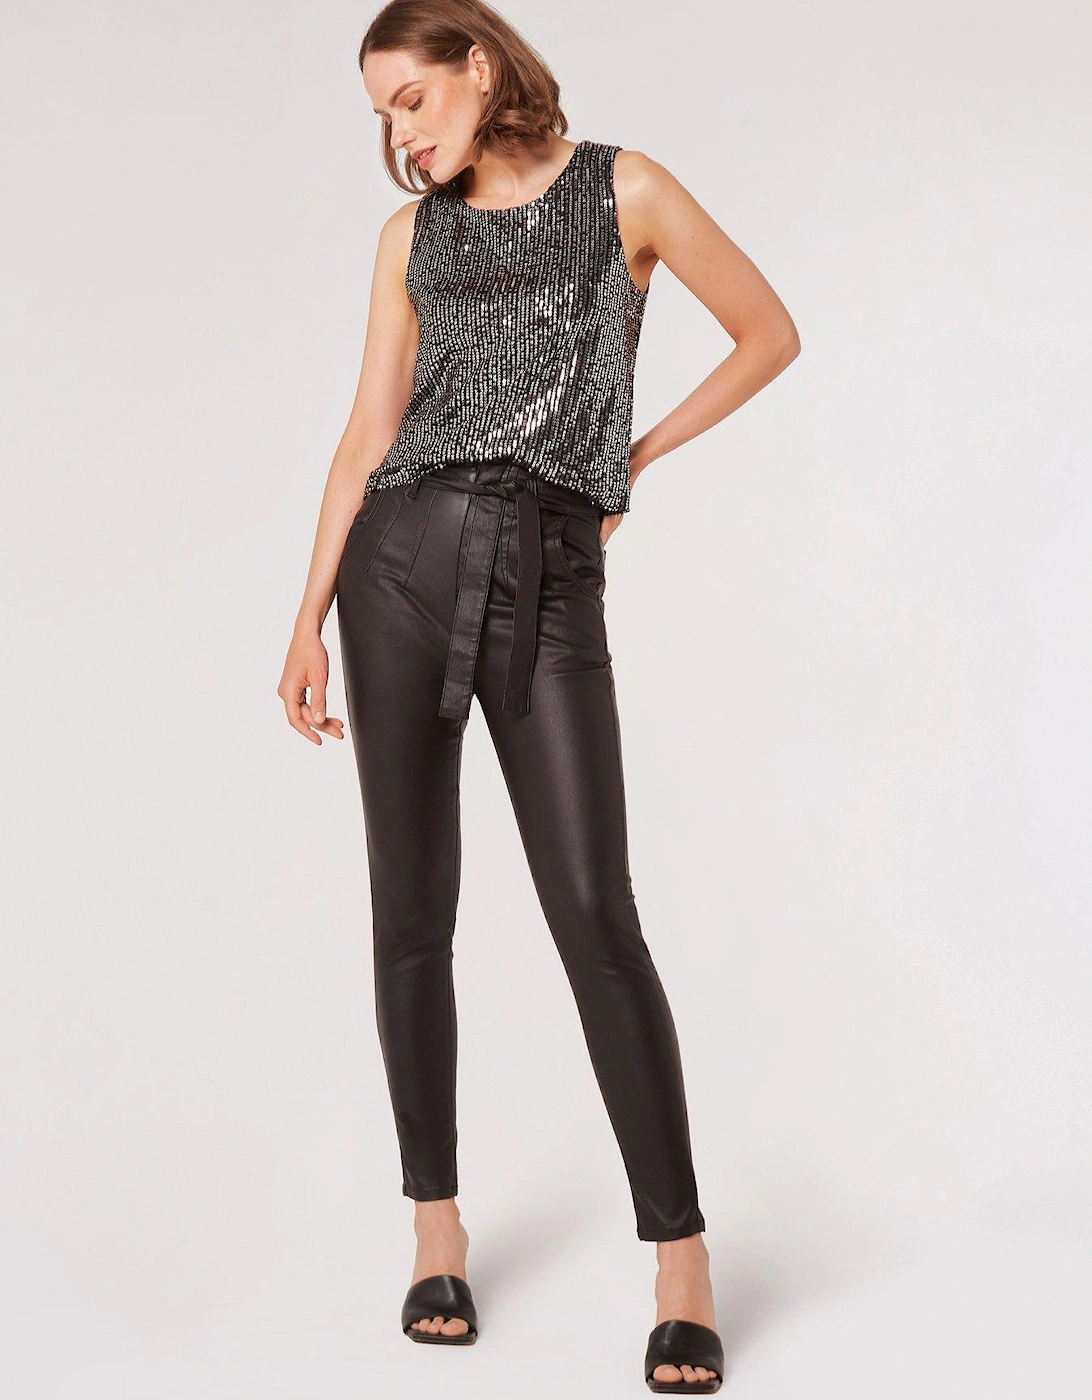 All Over Sequin Lines Shell Top